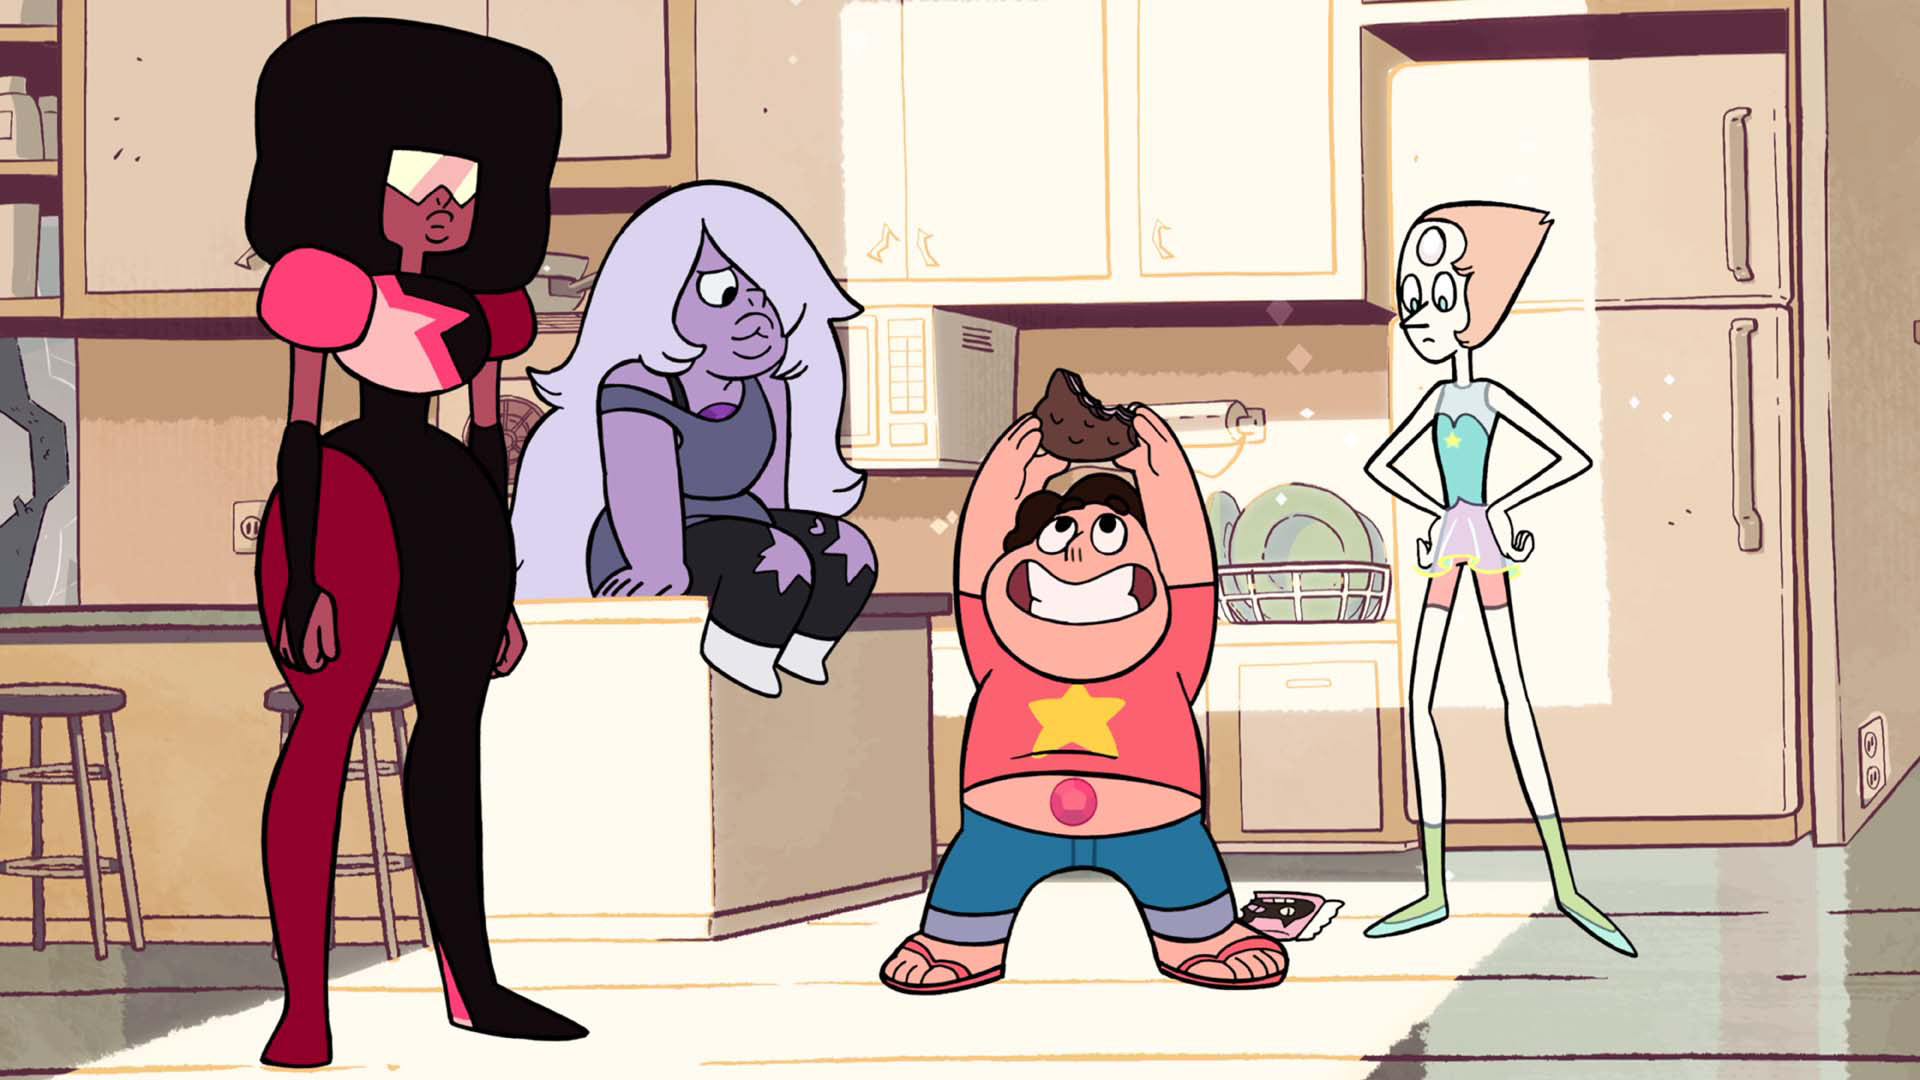 Steven Universe stands in kitchen with his bellybutton exposed, holding a snack cake up, joined by Crystal Gem beings Garnet, standing, Amethyst, seated on counter, and Pearl, watching from behind.